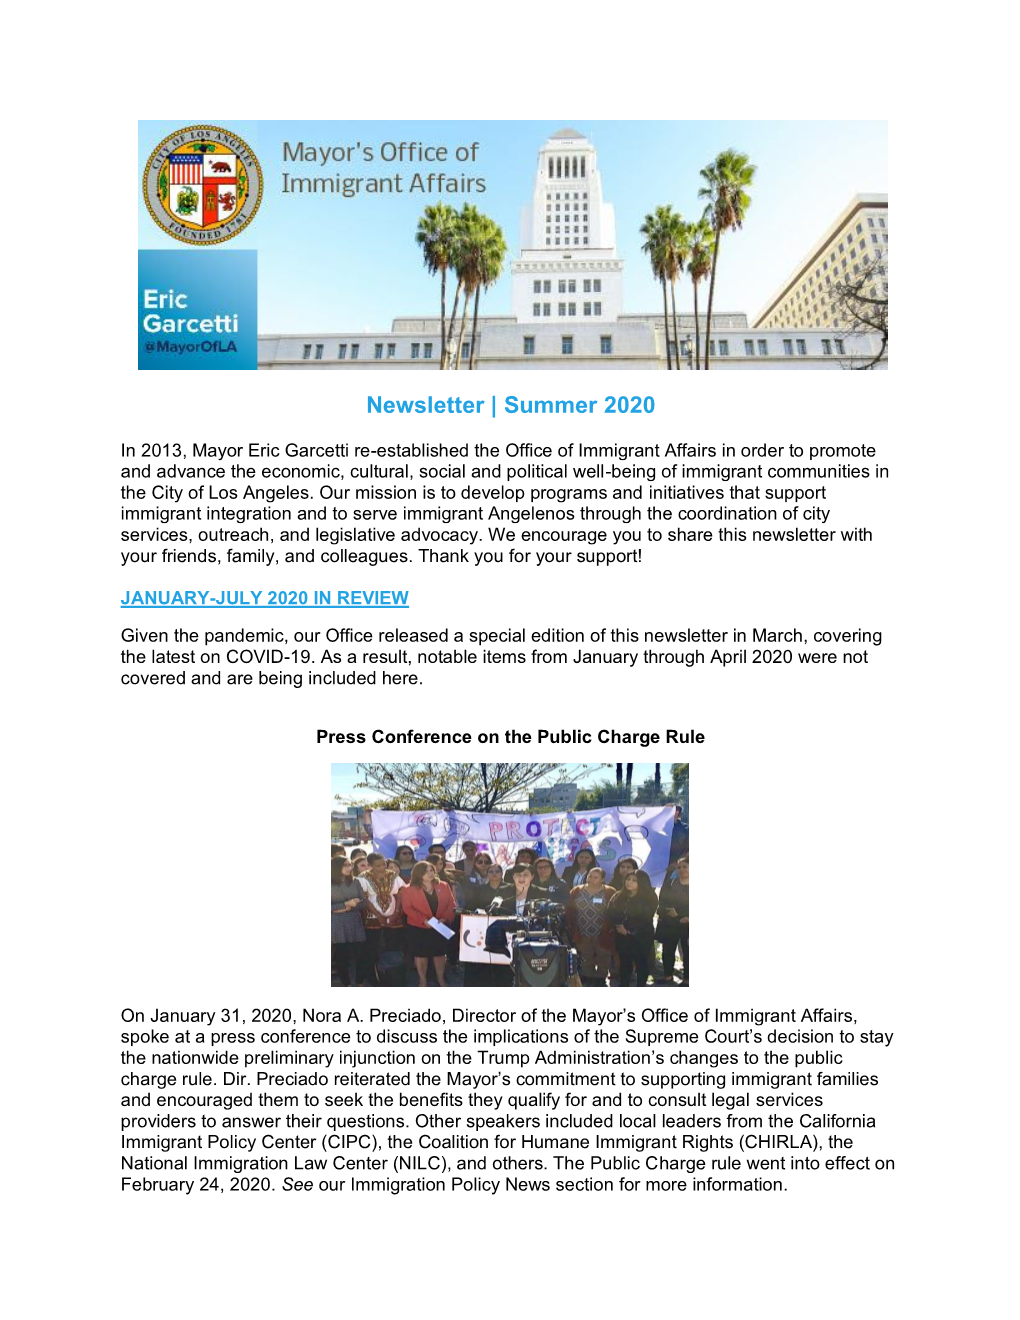 January-July 2020 Newsletter- Mayor's Office of Immigrant Affairs.Pdf